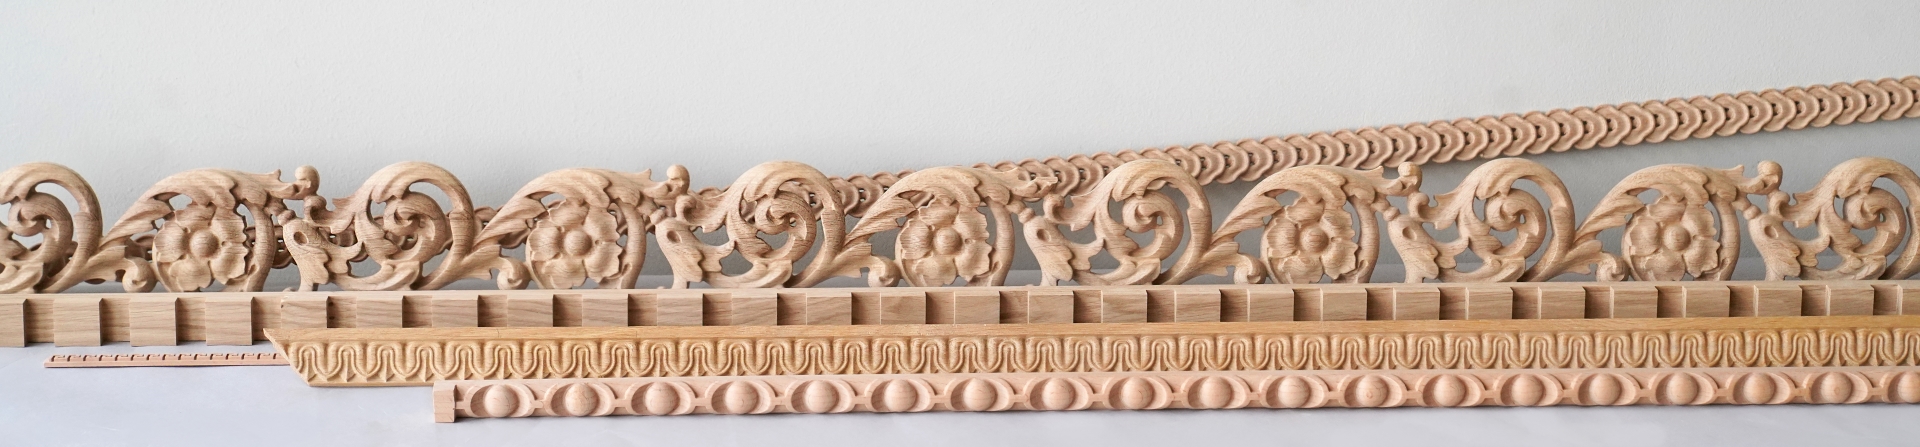 Solid wood moldings